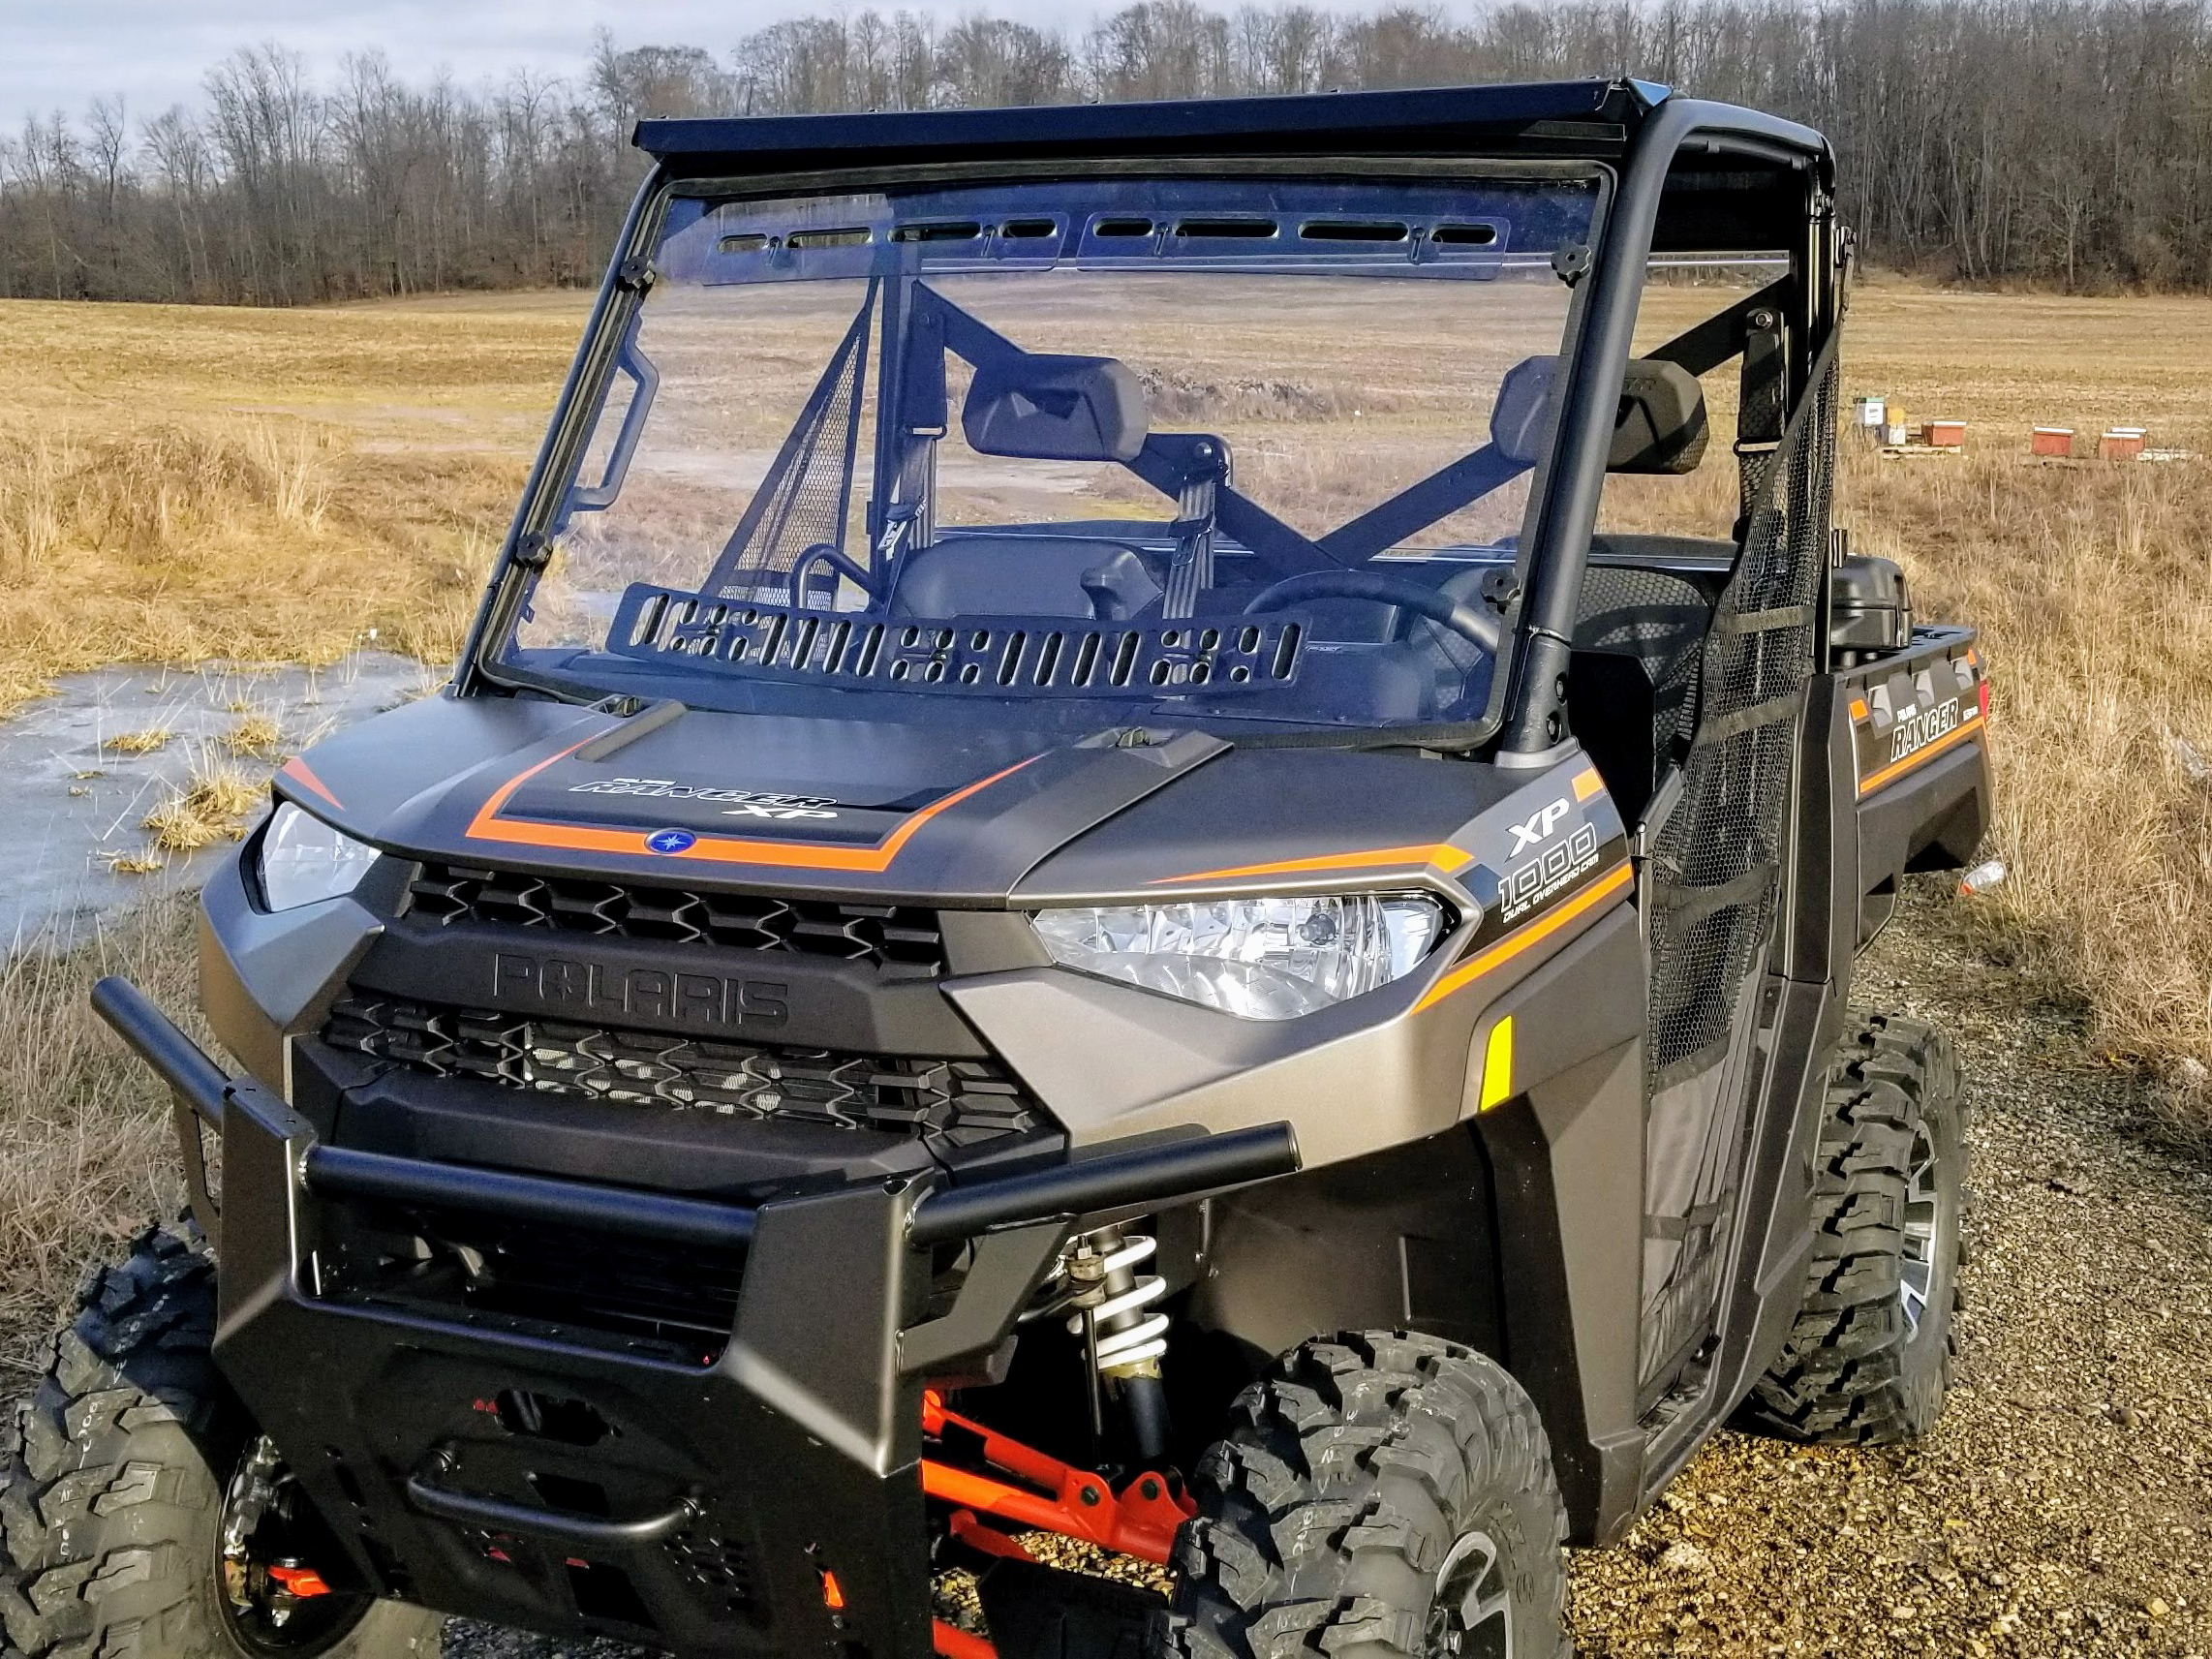 Full Windshield Dual Vent - For 13-17 Polaris Ranger w/ Profile Tubing - Click Image to Close